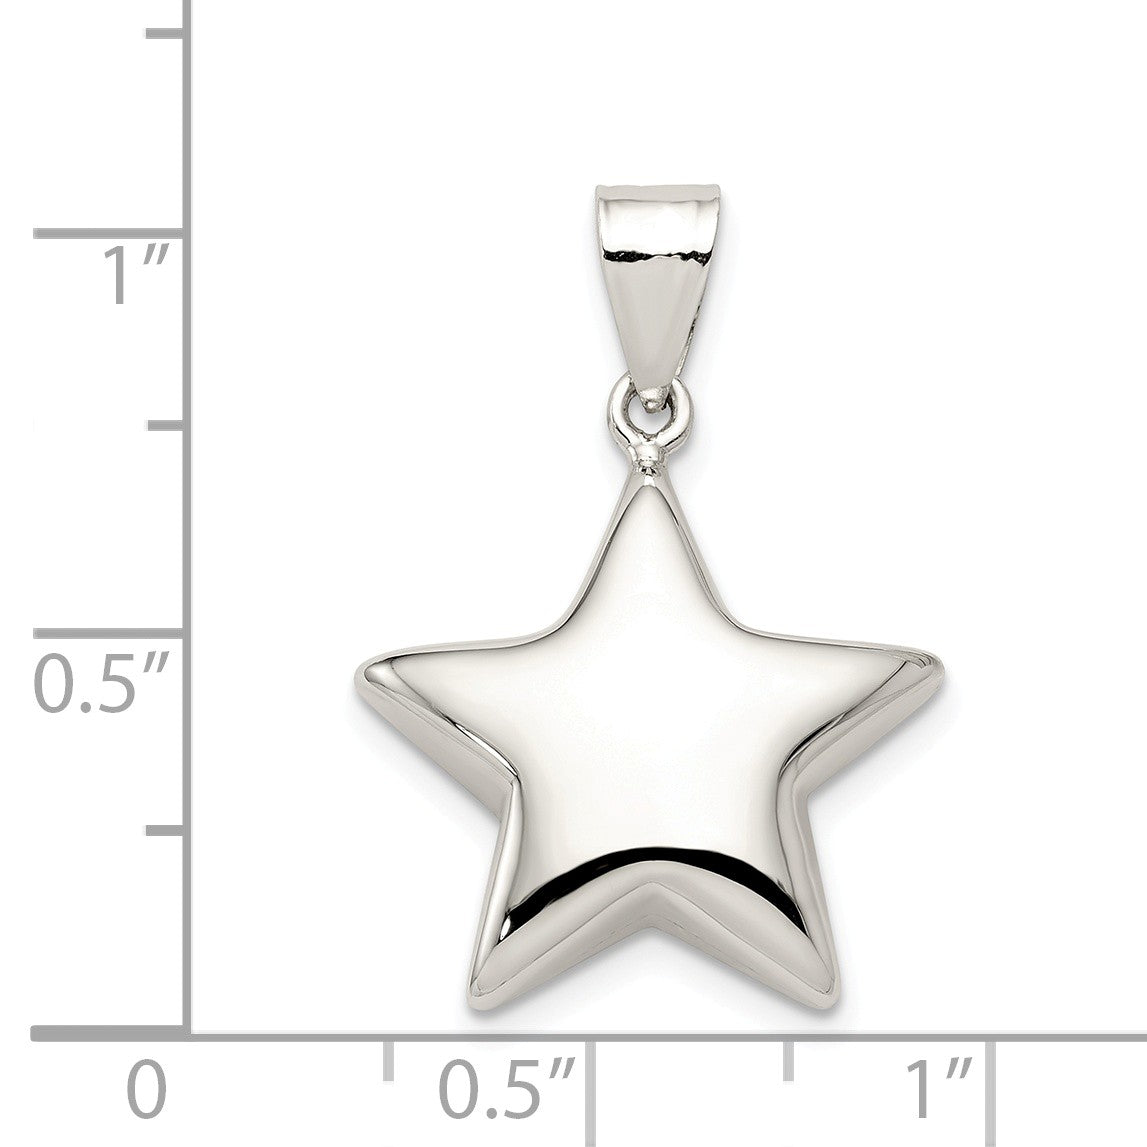 Alternate view of the Sterling Silver 18mm Polished Puffed Star Pendant by The Black Bow Jewelry Co.